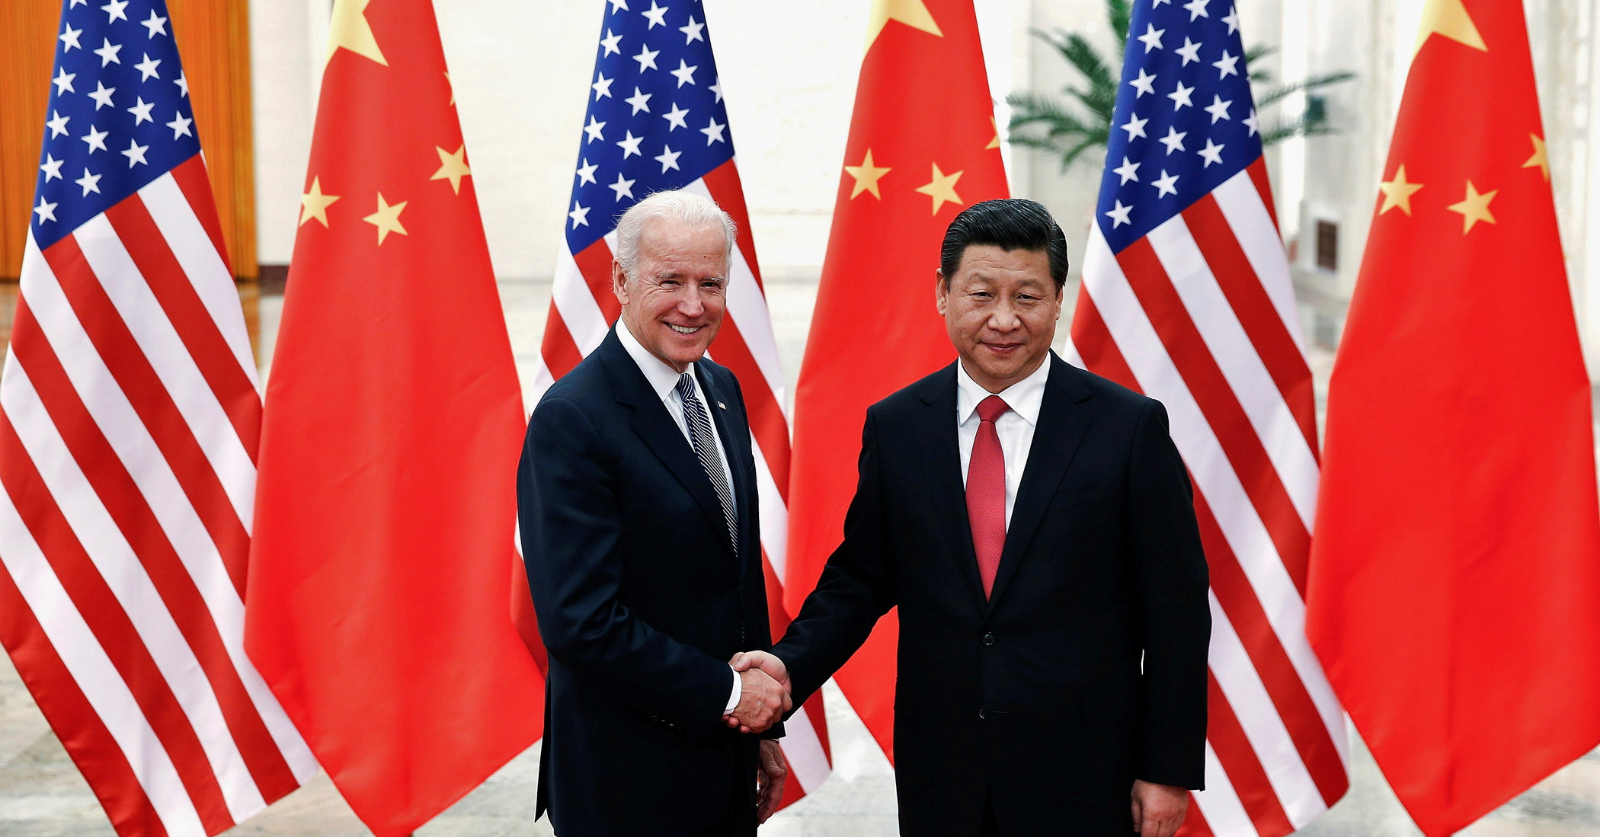 Biden and Xi will reportedly announce deal to crackdown on Chinese fentanyl production & trafficking